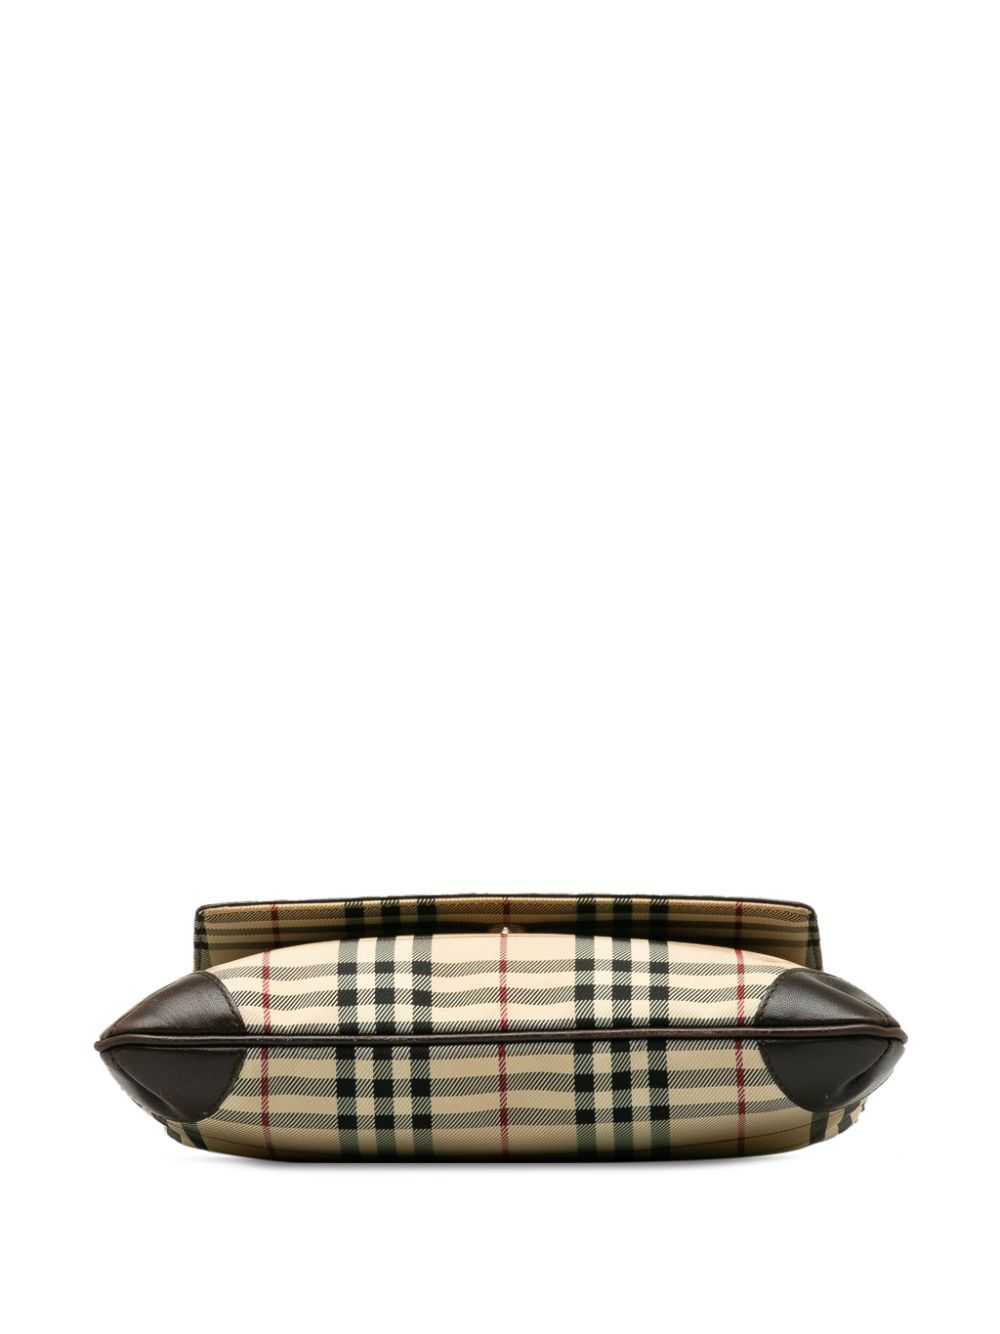 Burberry Pre-Owned 2000-2017 House Check crossbod… - image 4